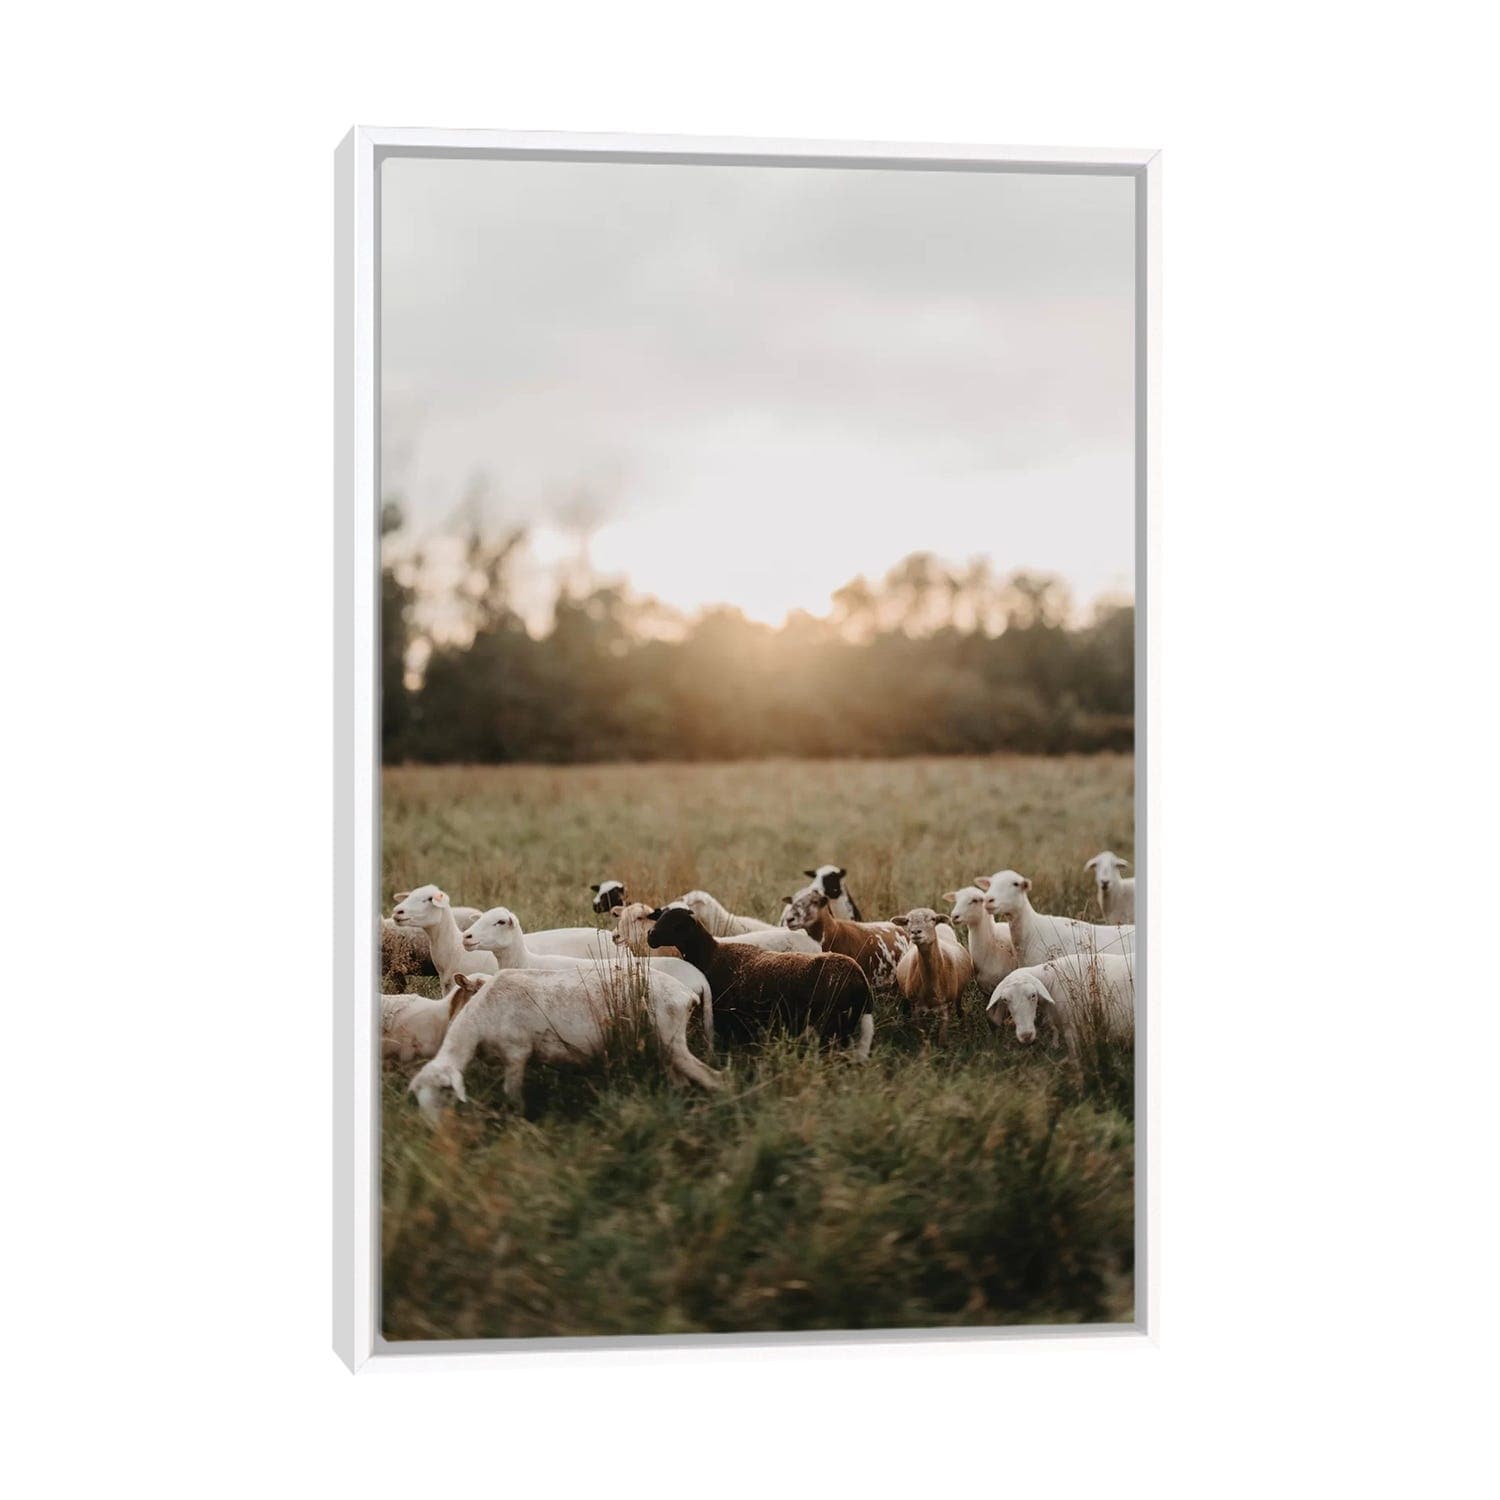 iCanvas Herd At Sunset" by Chelsea Victoria Framed - Bed Bath & Beyond - 37086080